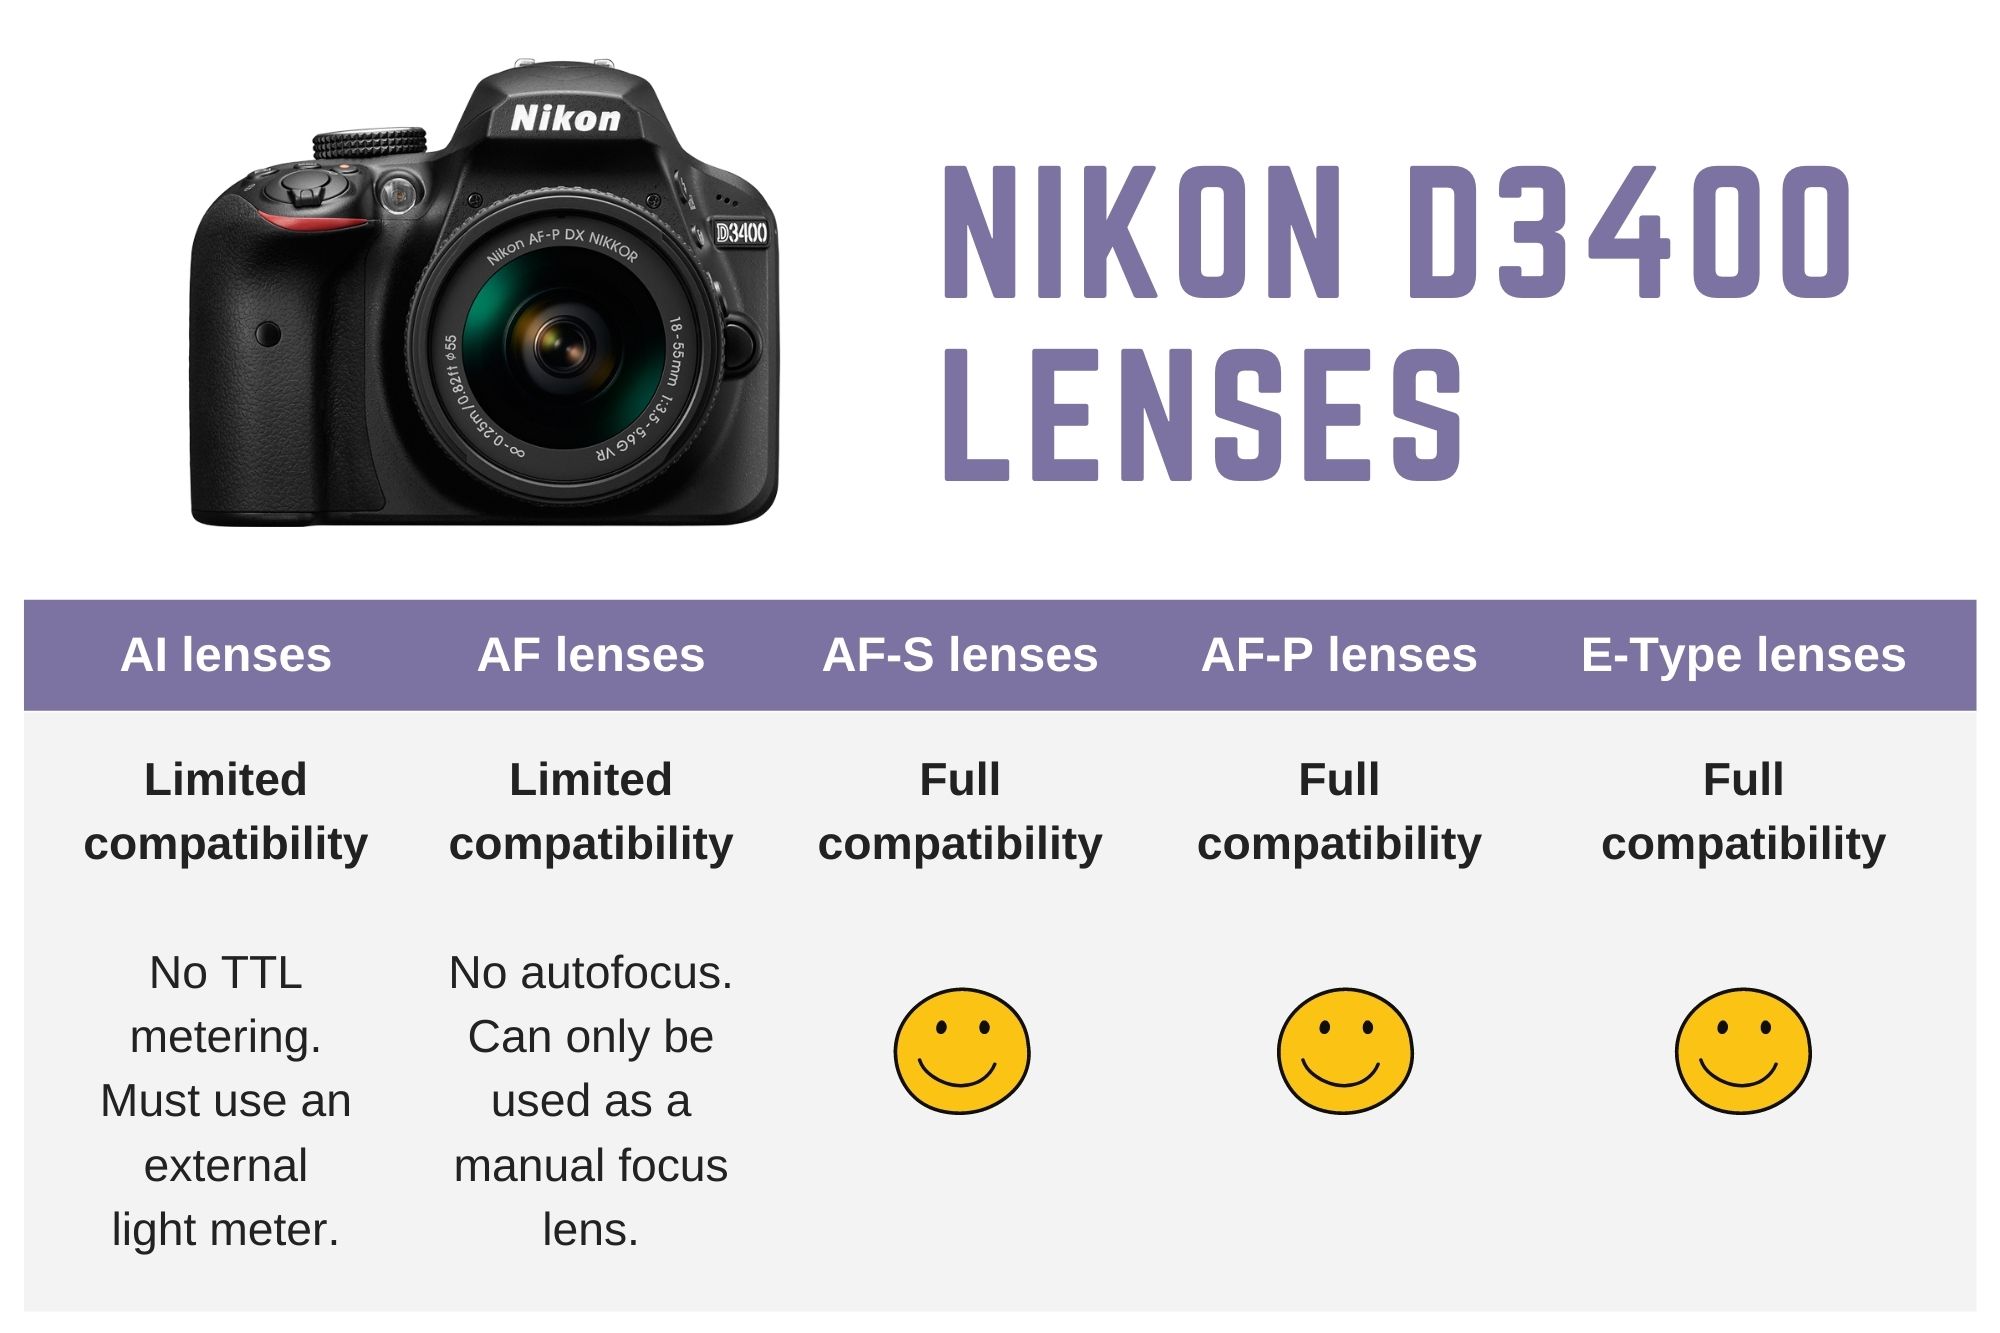 The Best Nikon D3400 Lenses in 2021 The Ultimate Guide